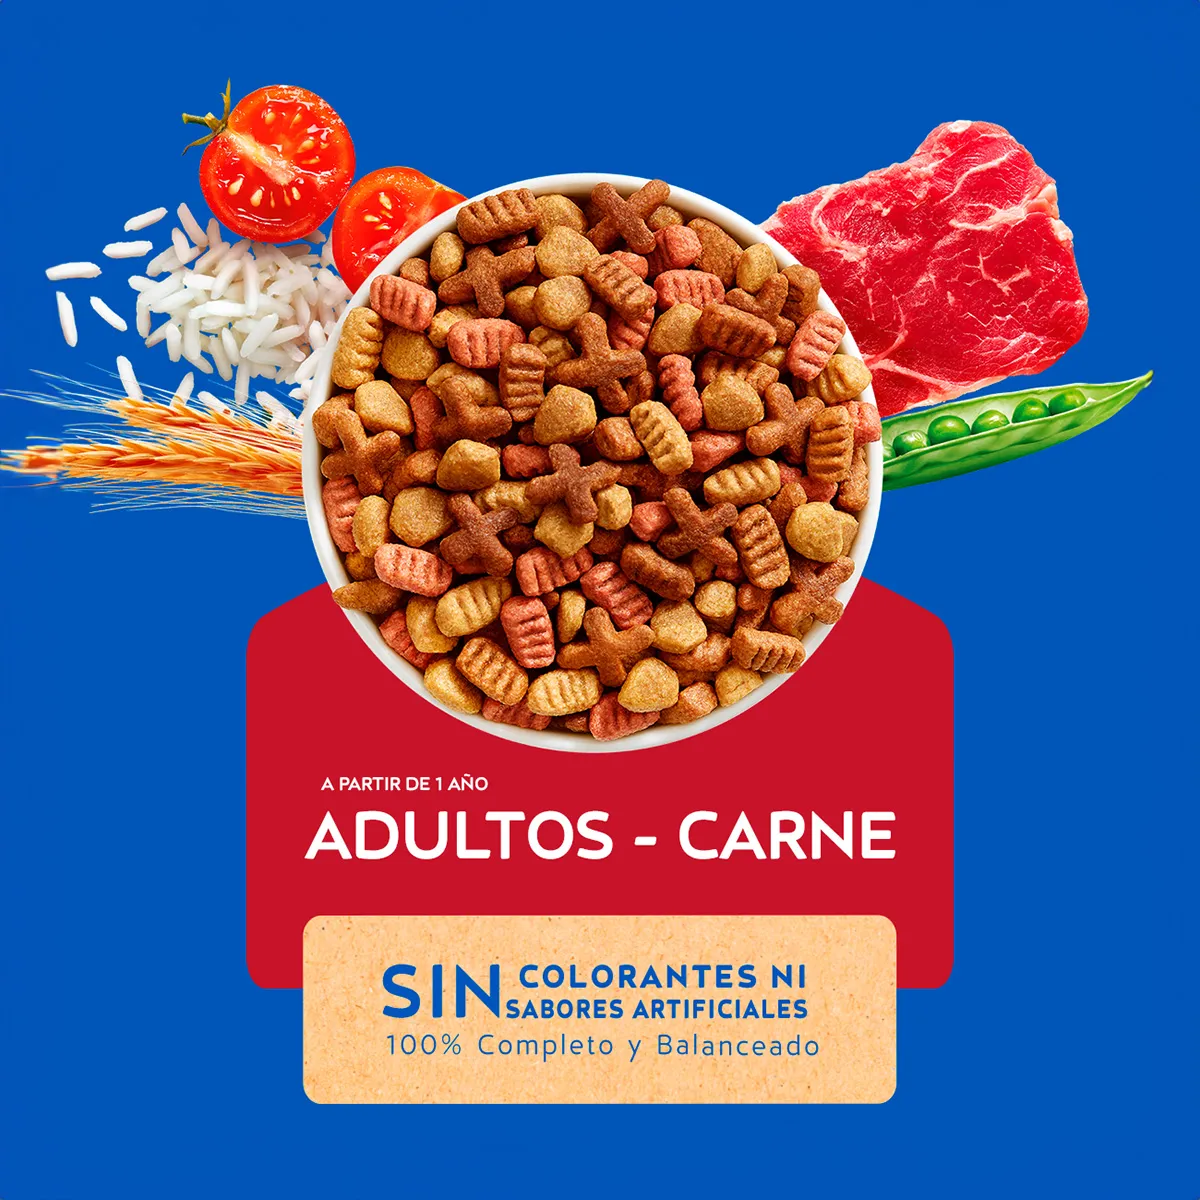 1. Product out of package - Adultos Carne.jpg